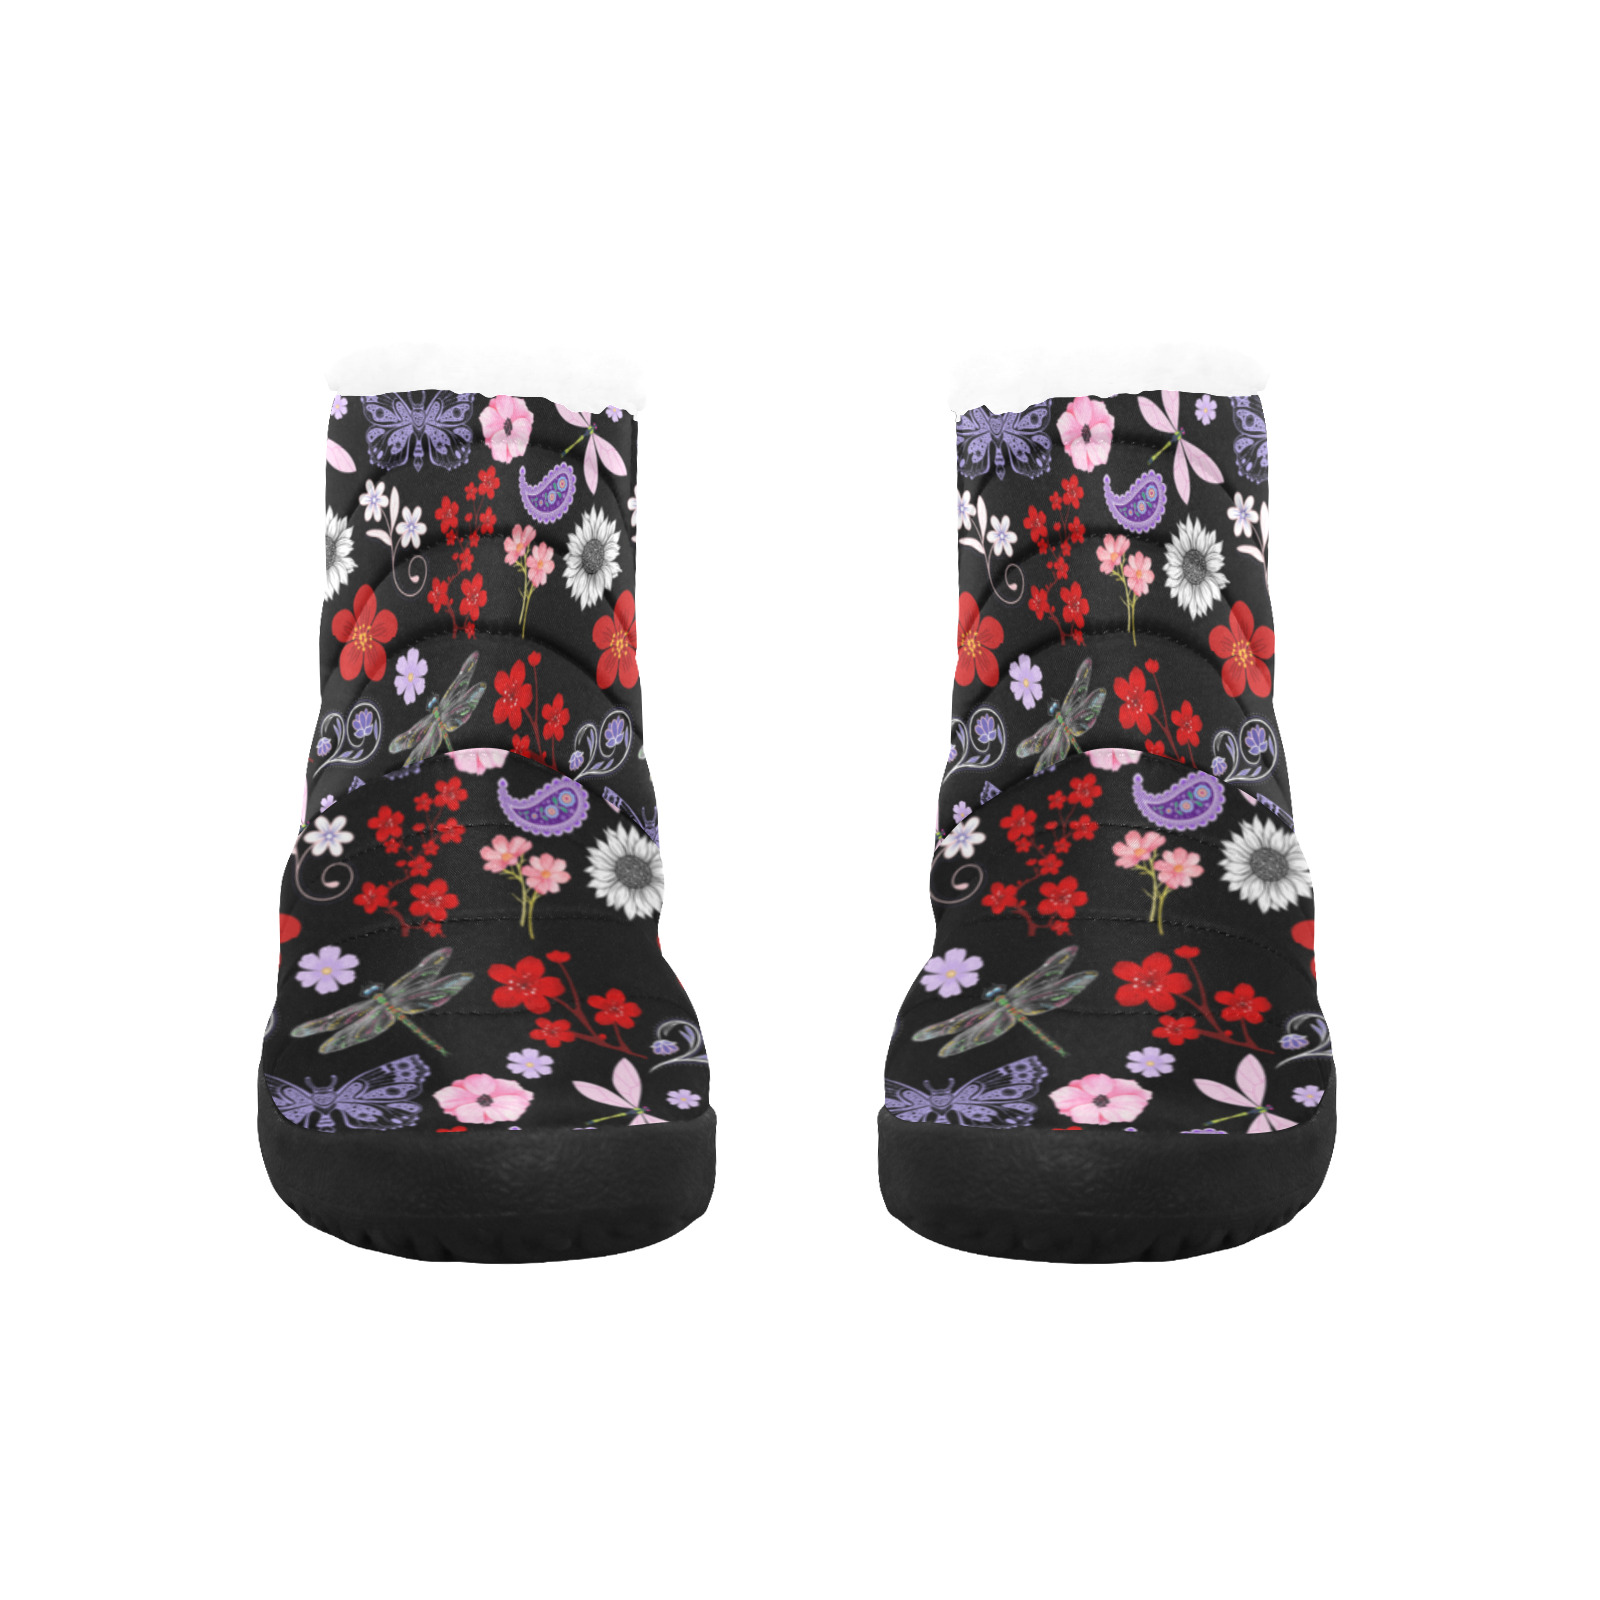 Black, Red, Pink, Purple, Dragonflies, Butterfly and Flowers Design Women's Cotton-Padded Shoes (Model 19291)